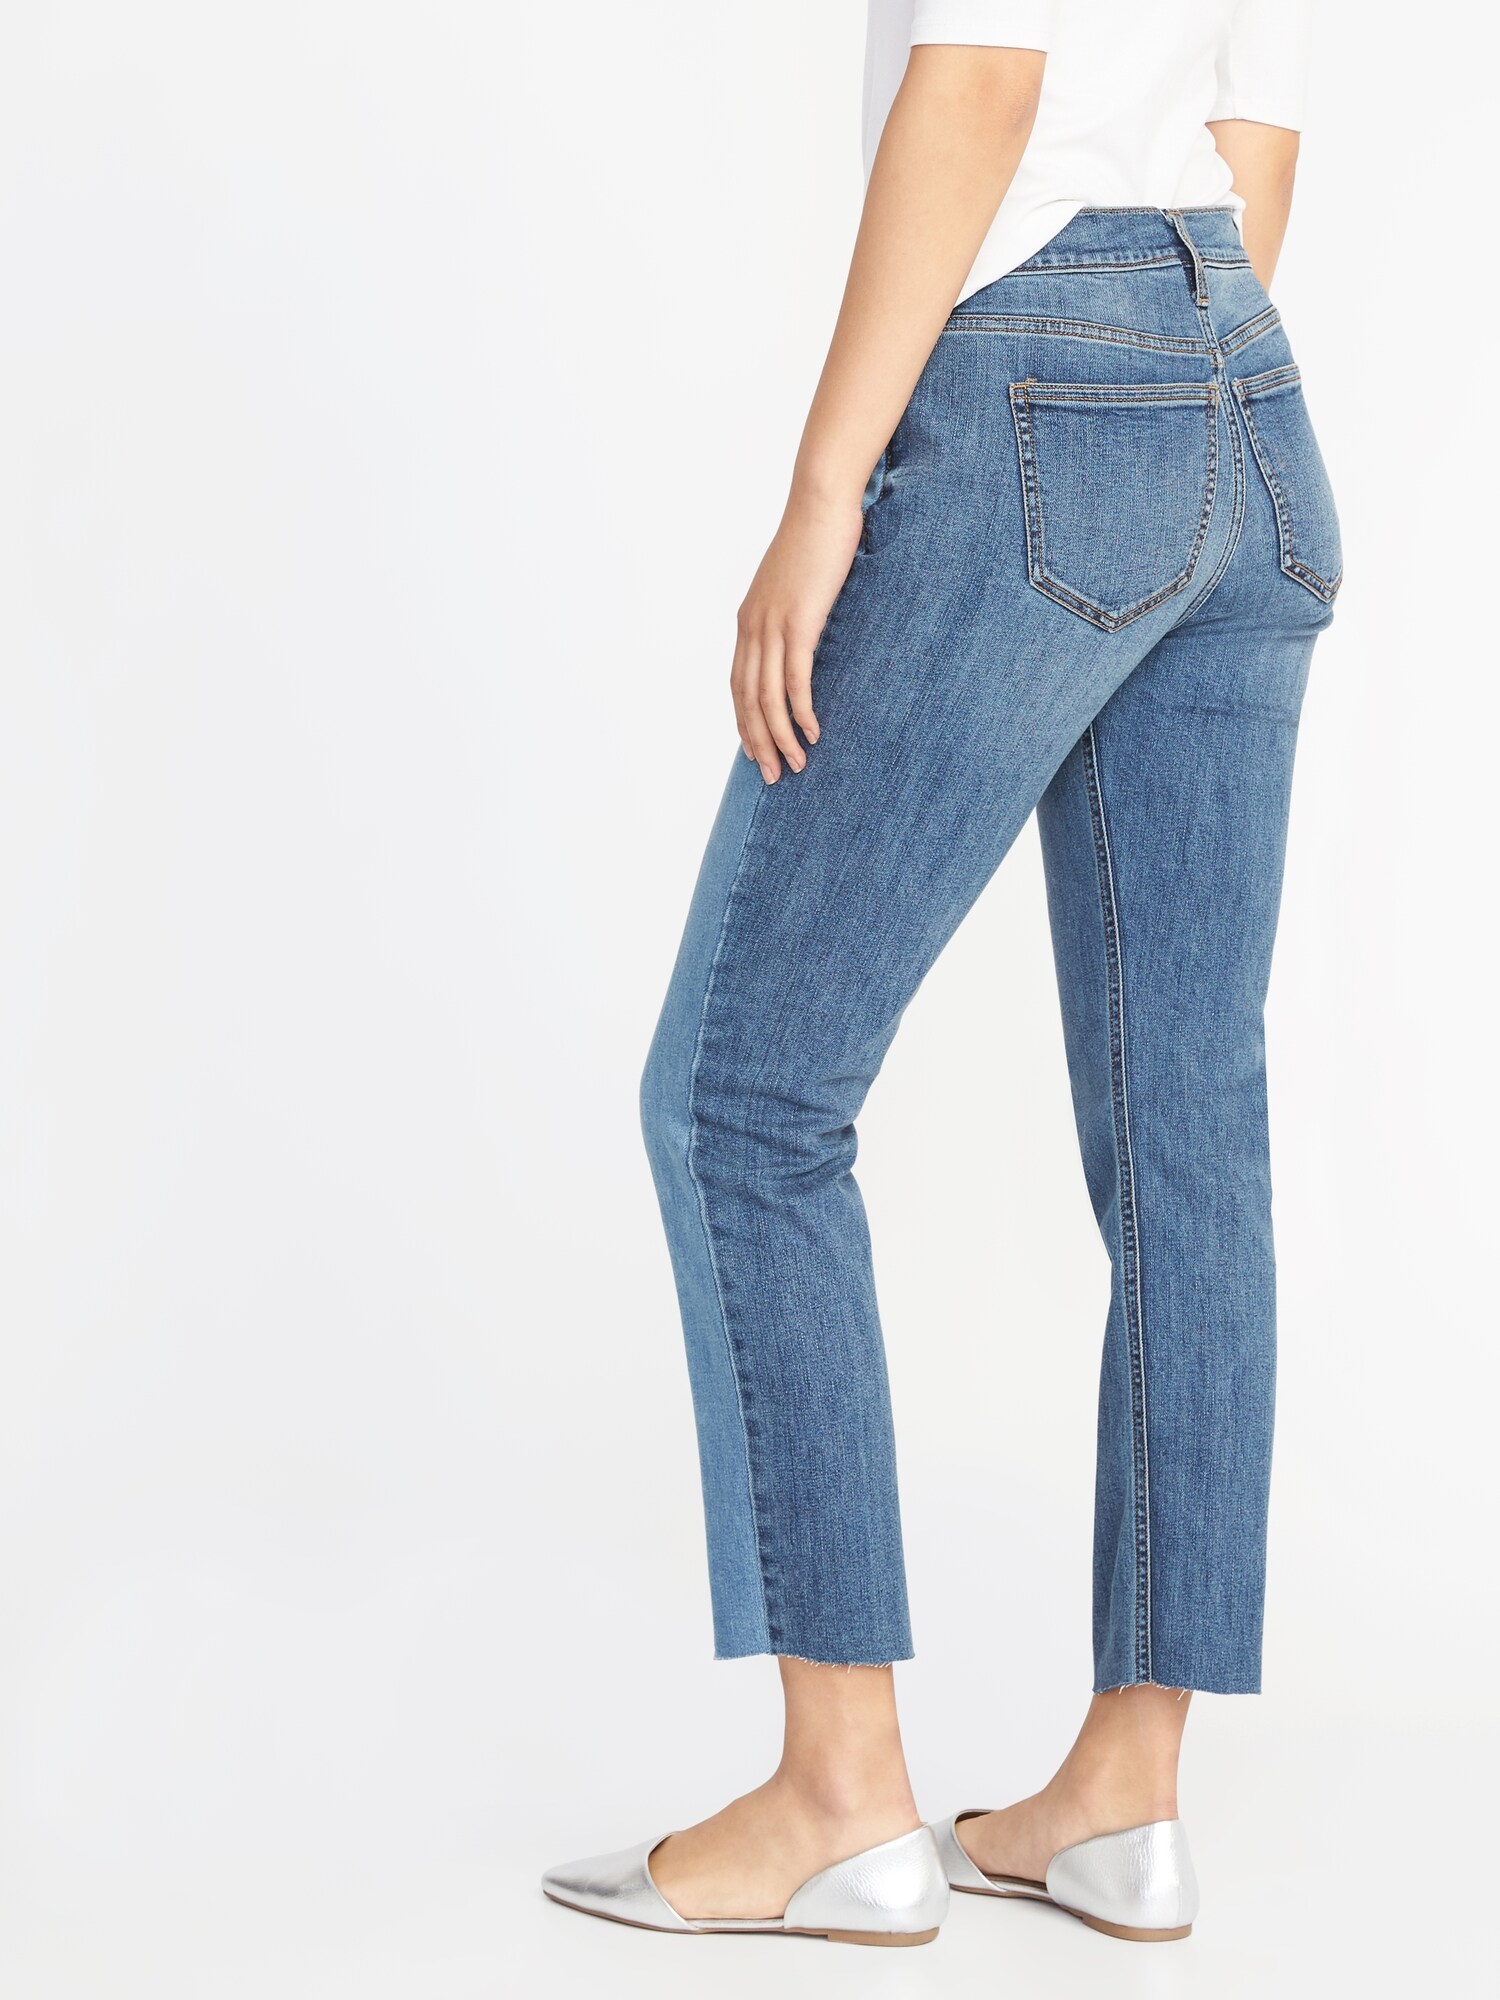 Image result for The Power Jean, a.k.a. The Perfect Straight for Women